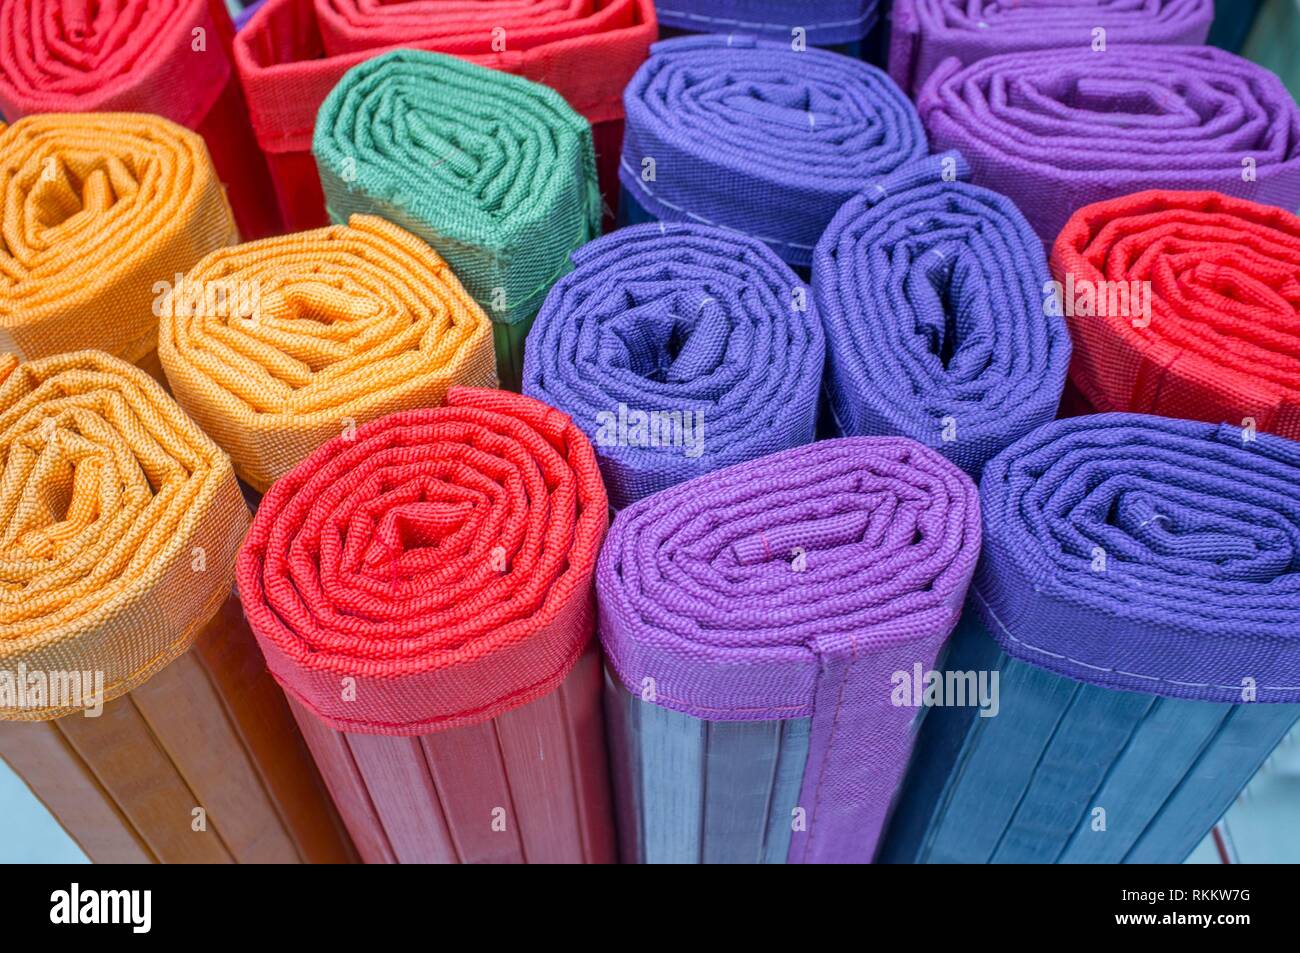 Loads of many rolled colorful light ratan carpets. Closeup. Stock Photo